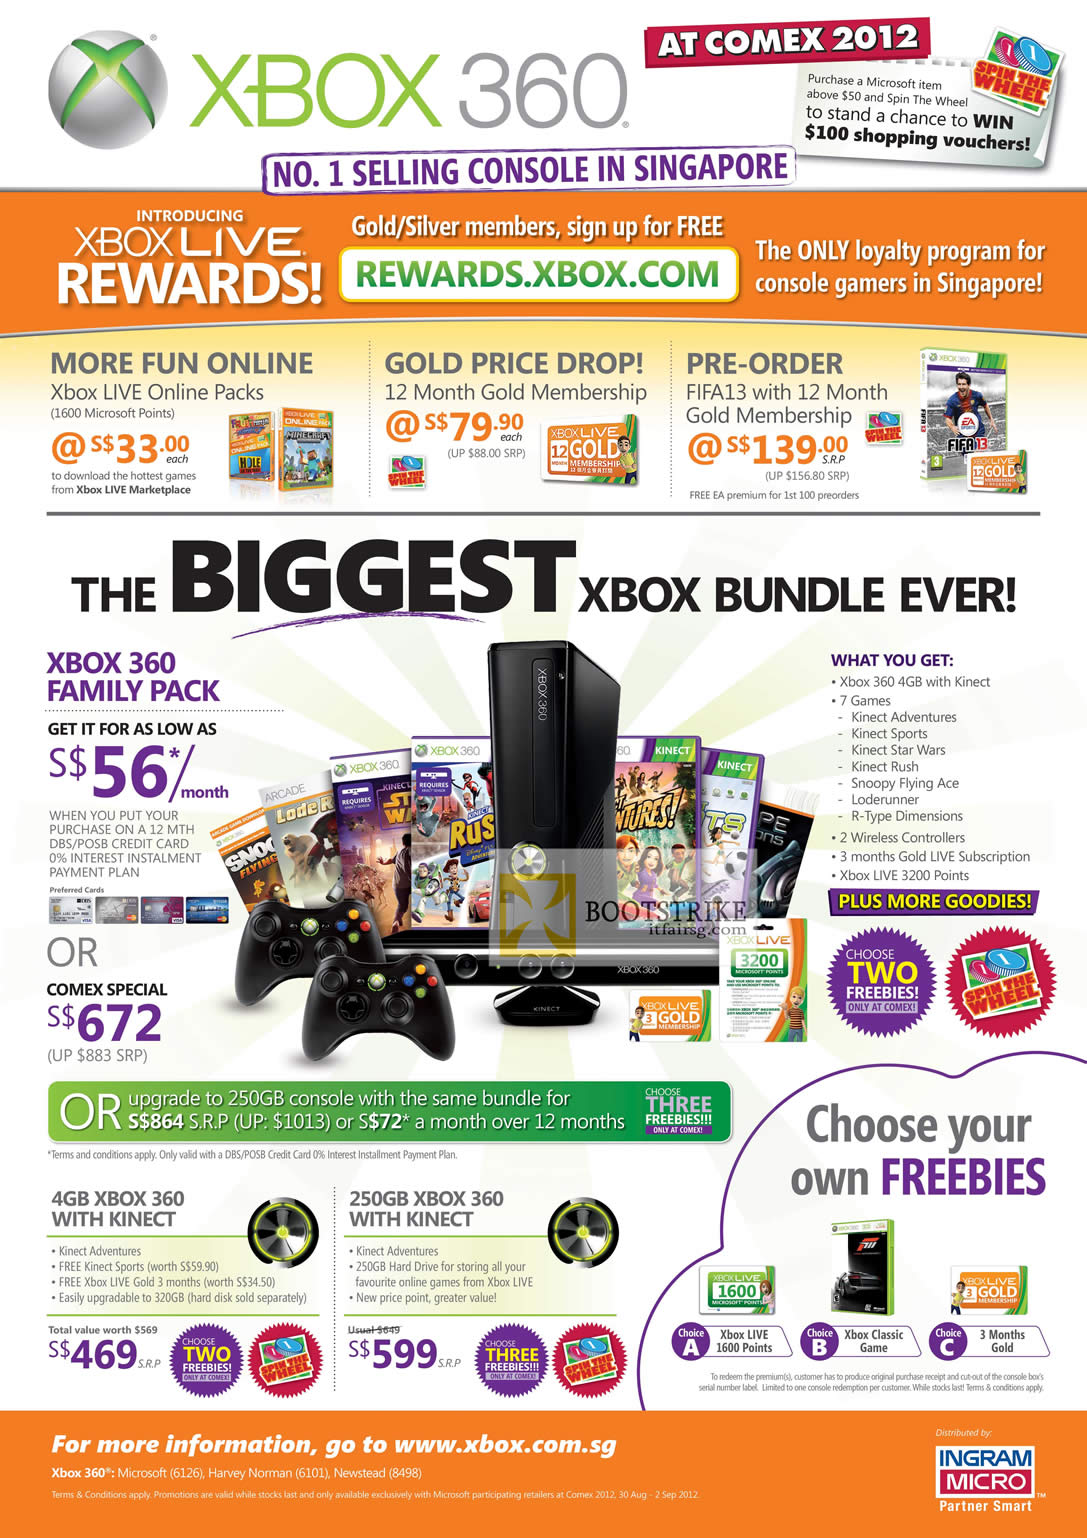 COMEX 2012 price list image brochure of Microsoft Xbox 360 Family Pack, Live Online Packs, Gold Membership, Kinect